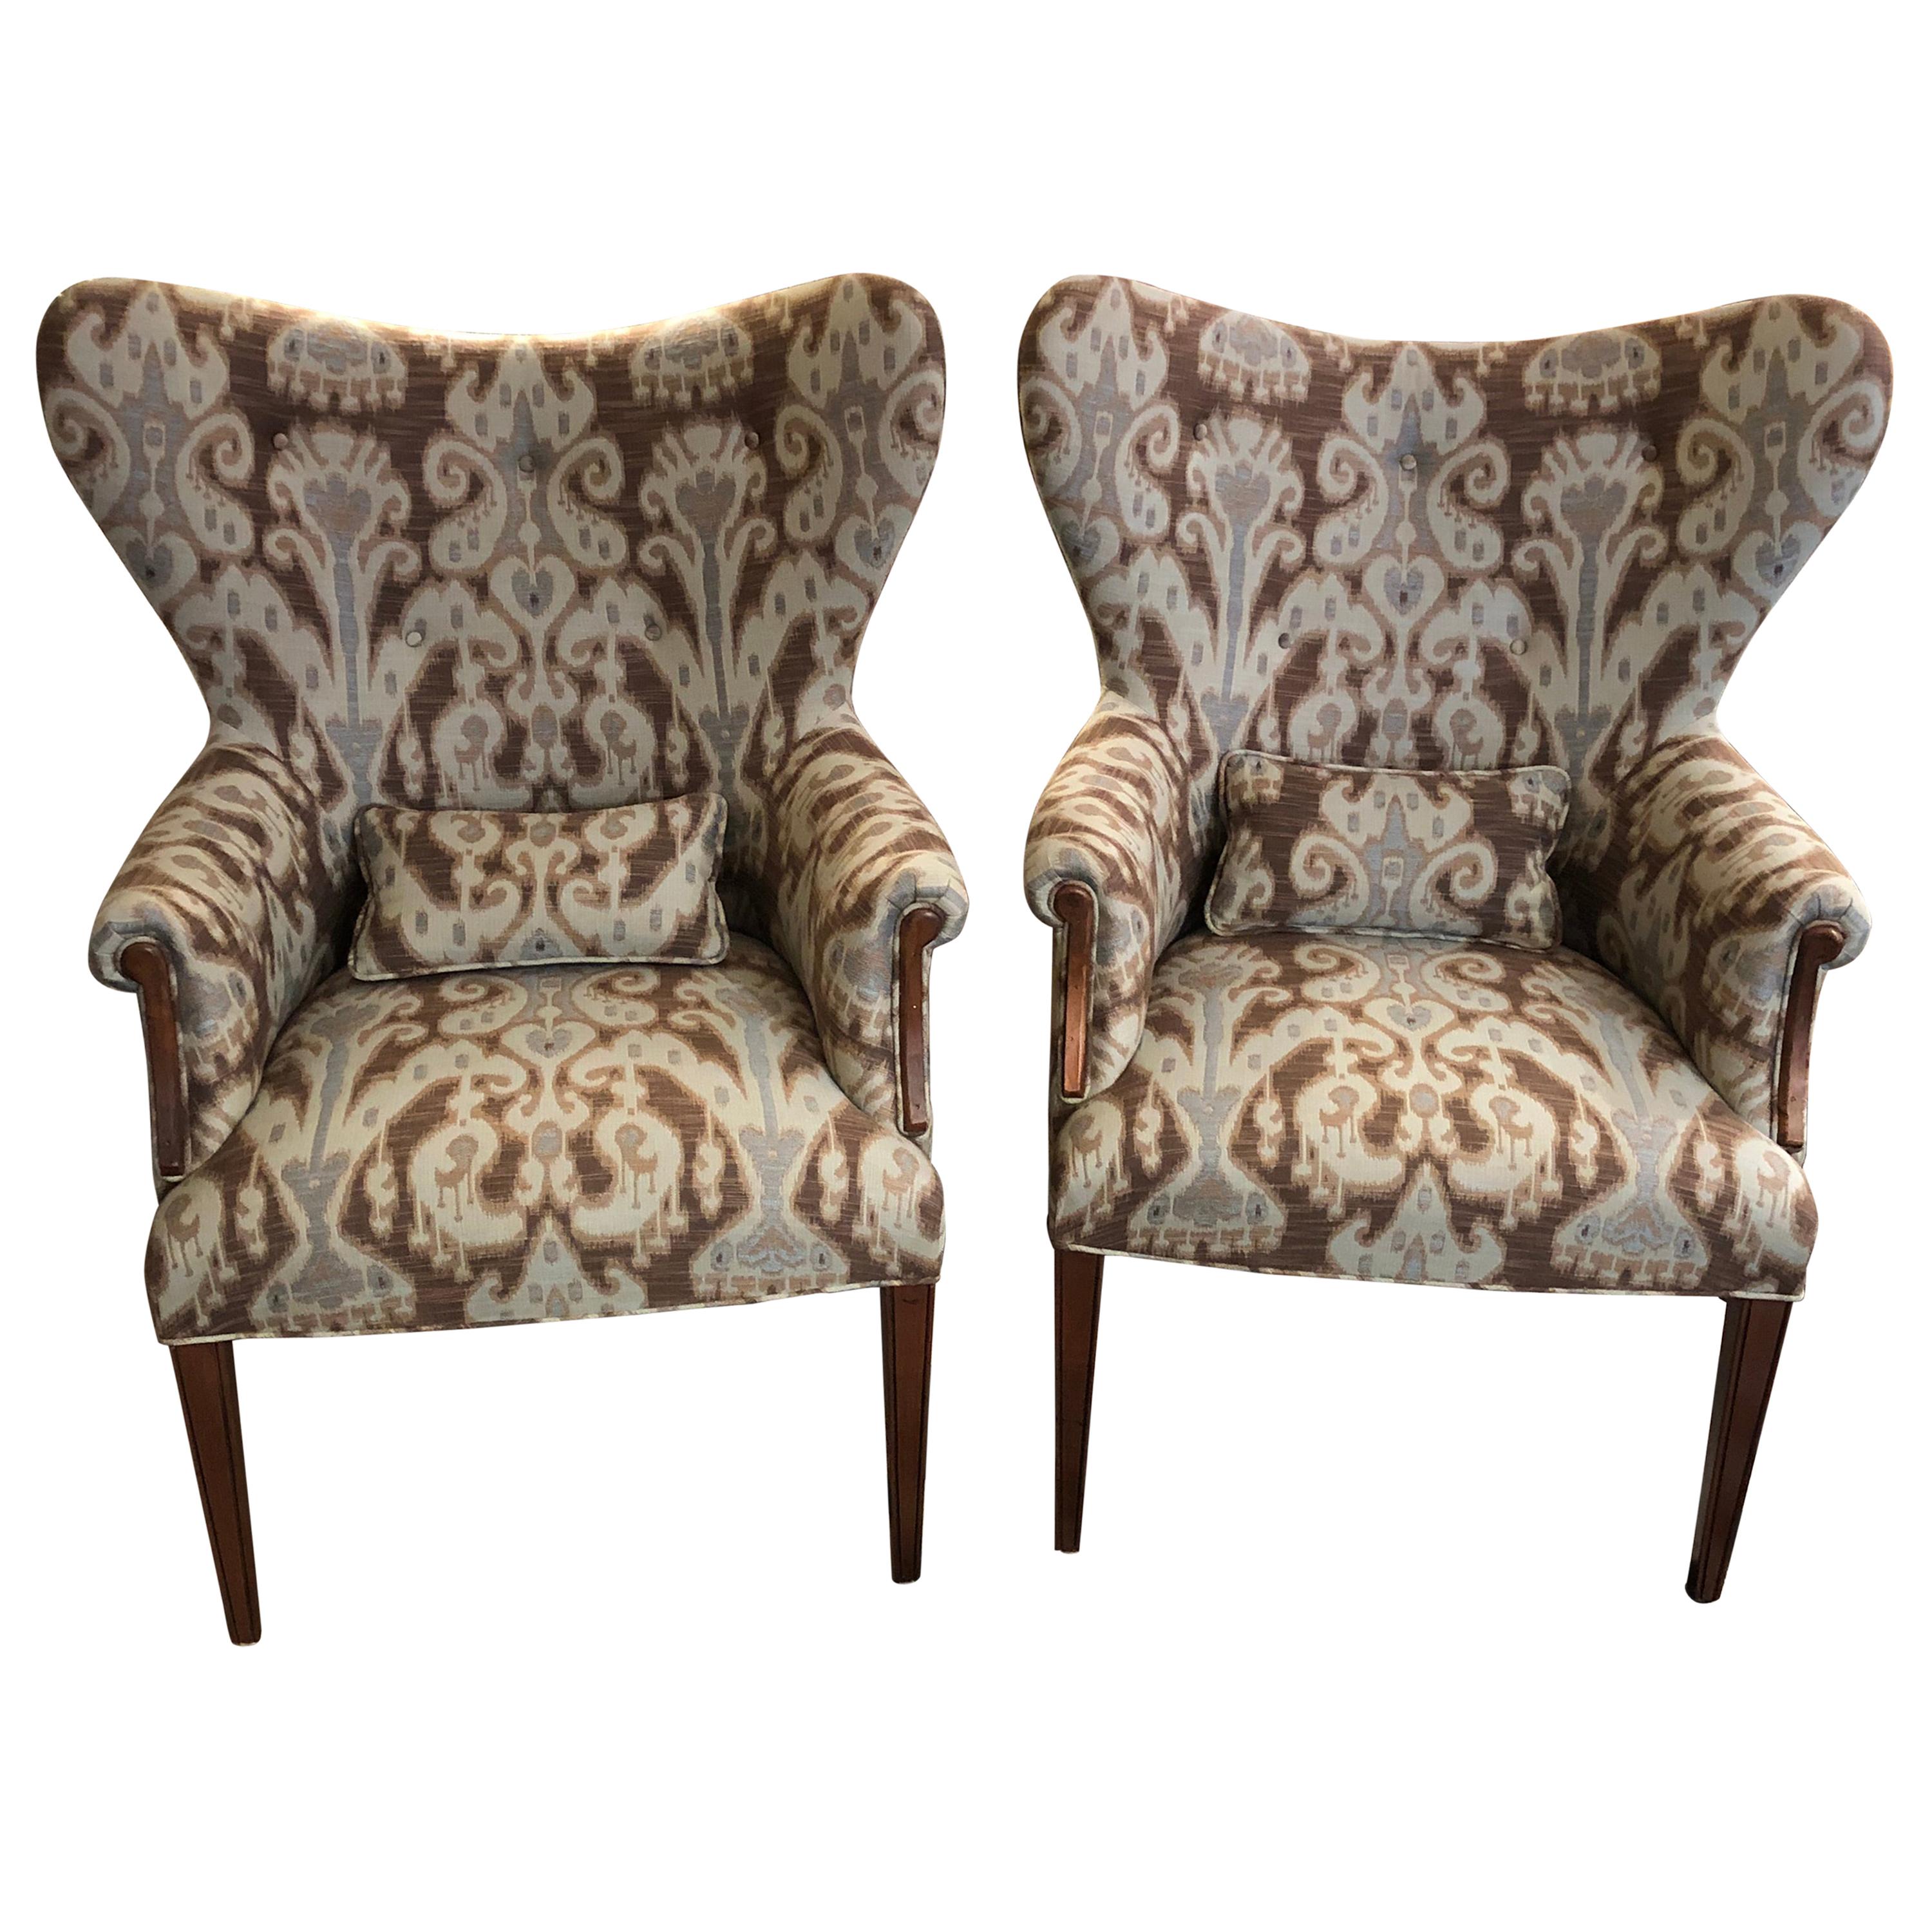 Fabulous Pair of Ikat Upholstered Wing Chairs